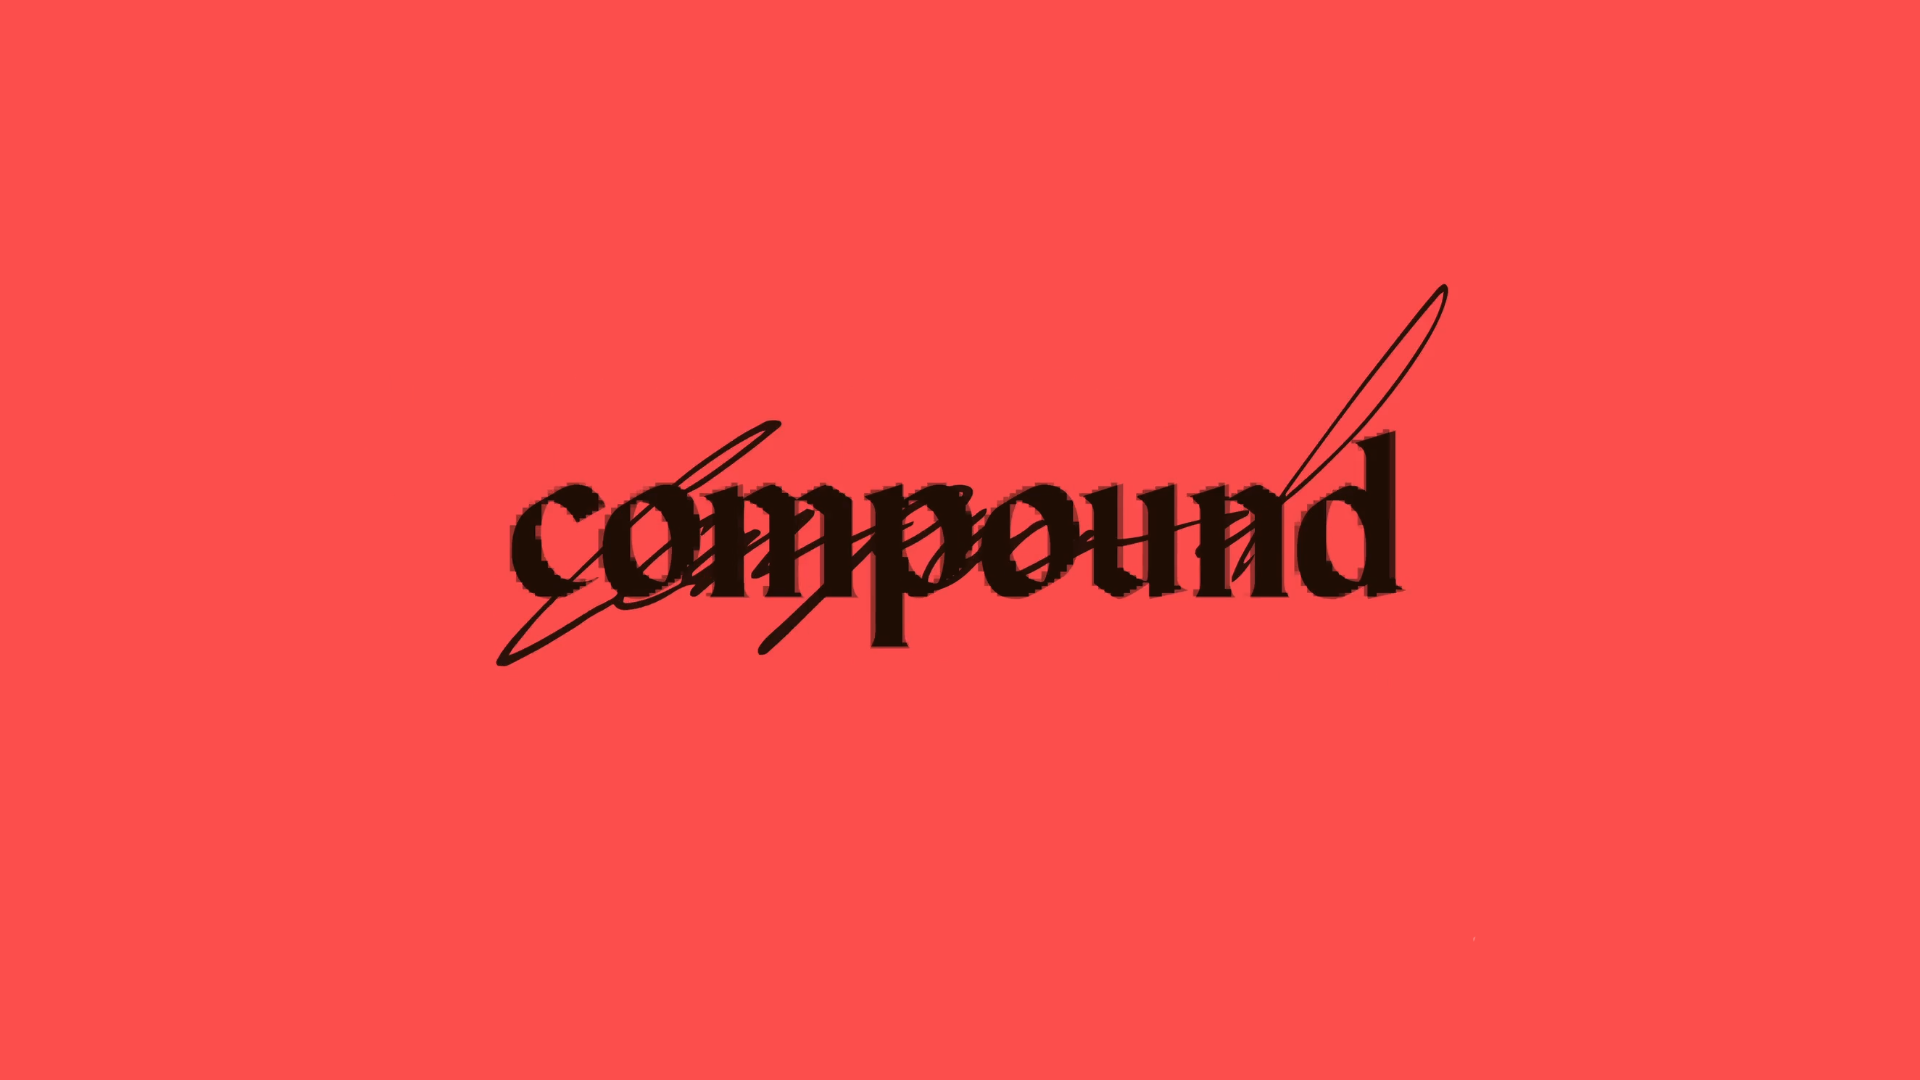 The word "compound" is written in bold, black Gothic-style font on a solid red background. The word is crossed out with a single diagonal line.